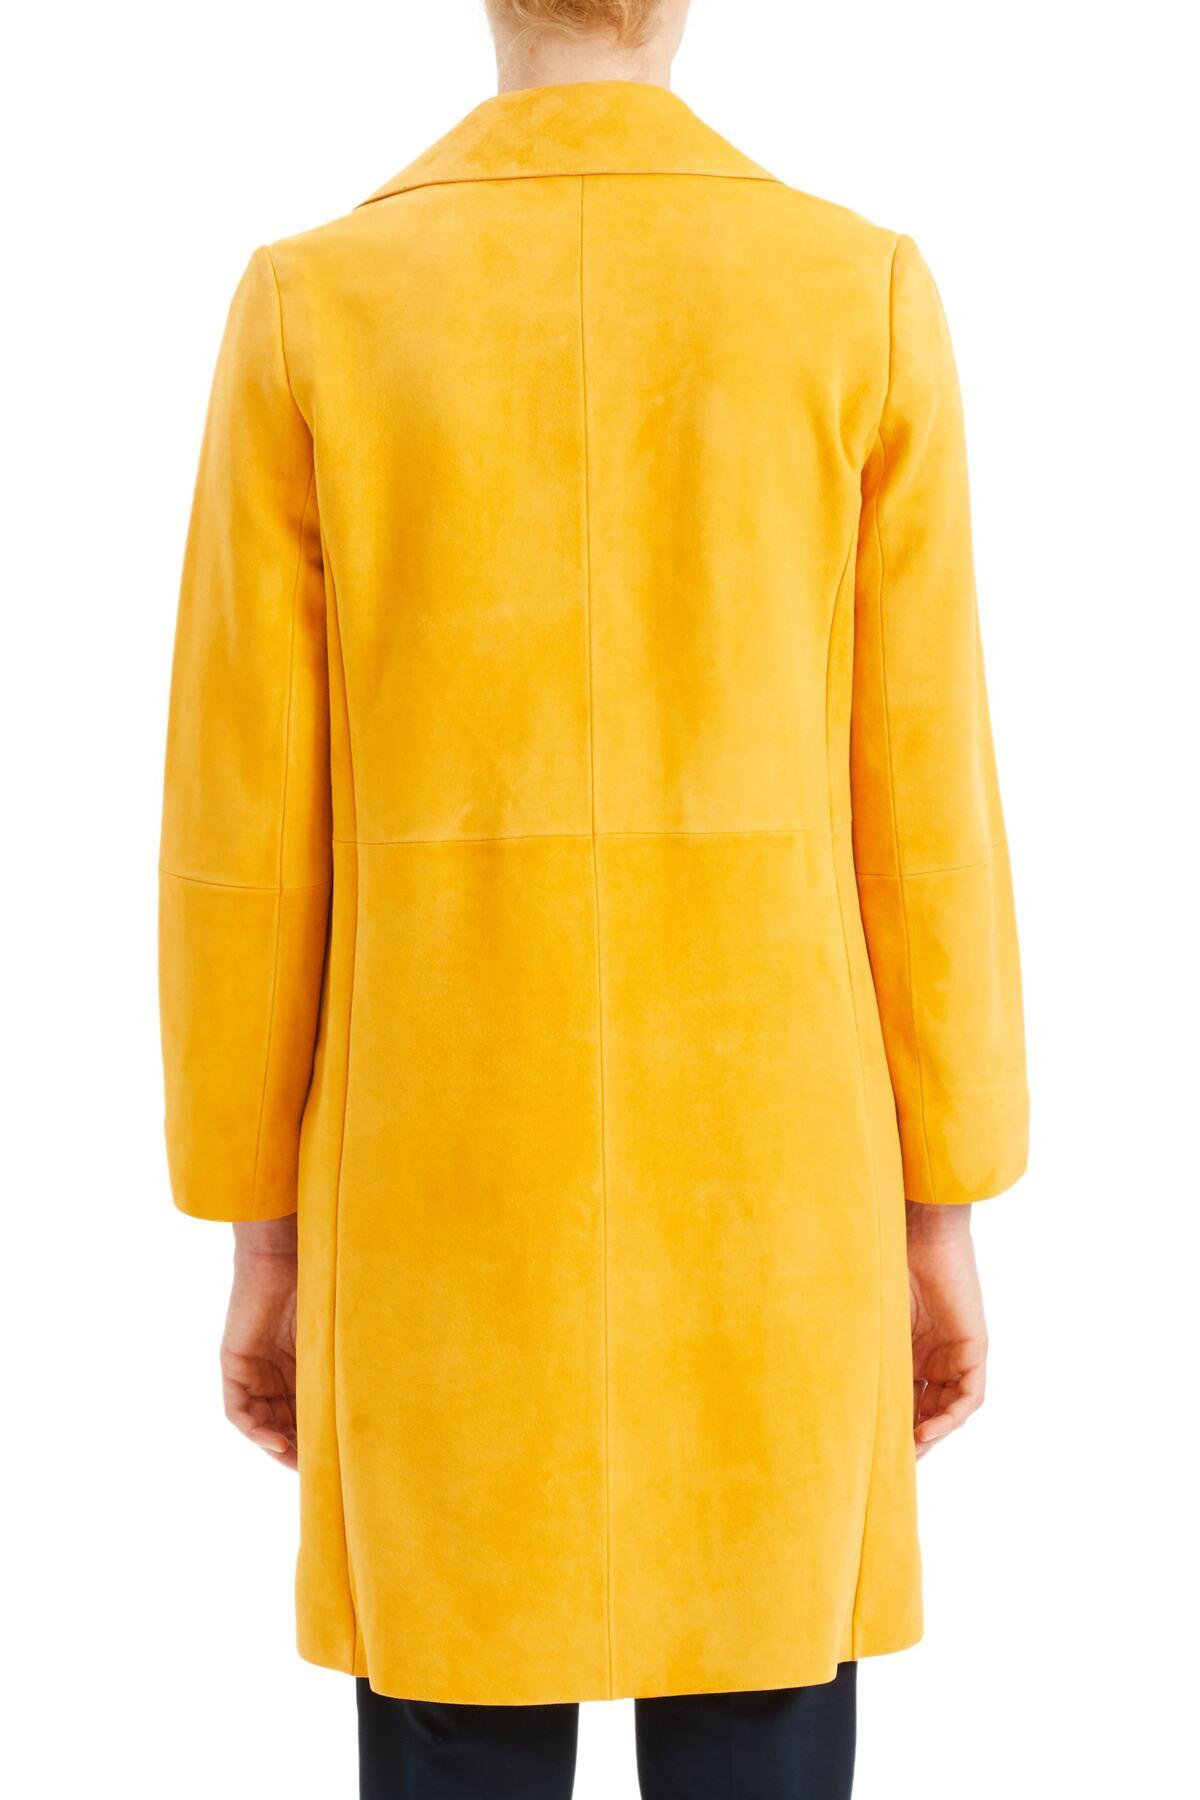 Theory Piazza Suede Button-front Long Coat in Yellow - Lyst